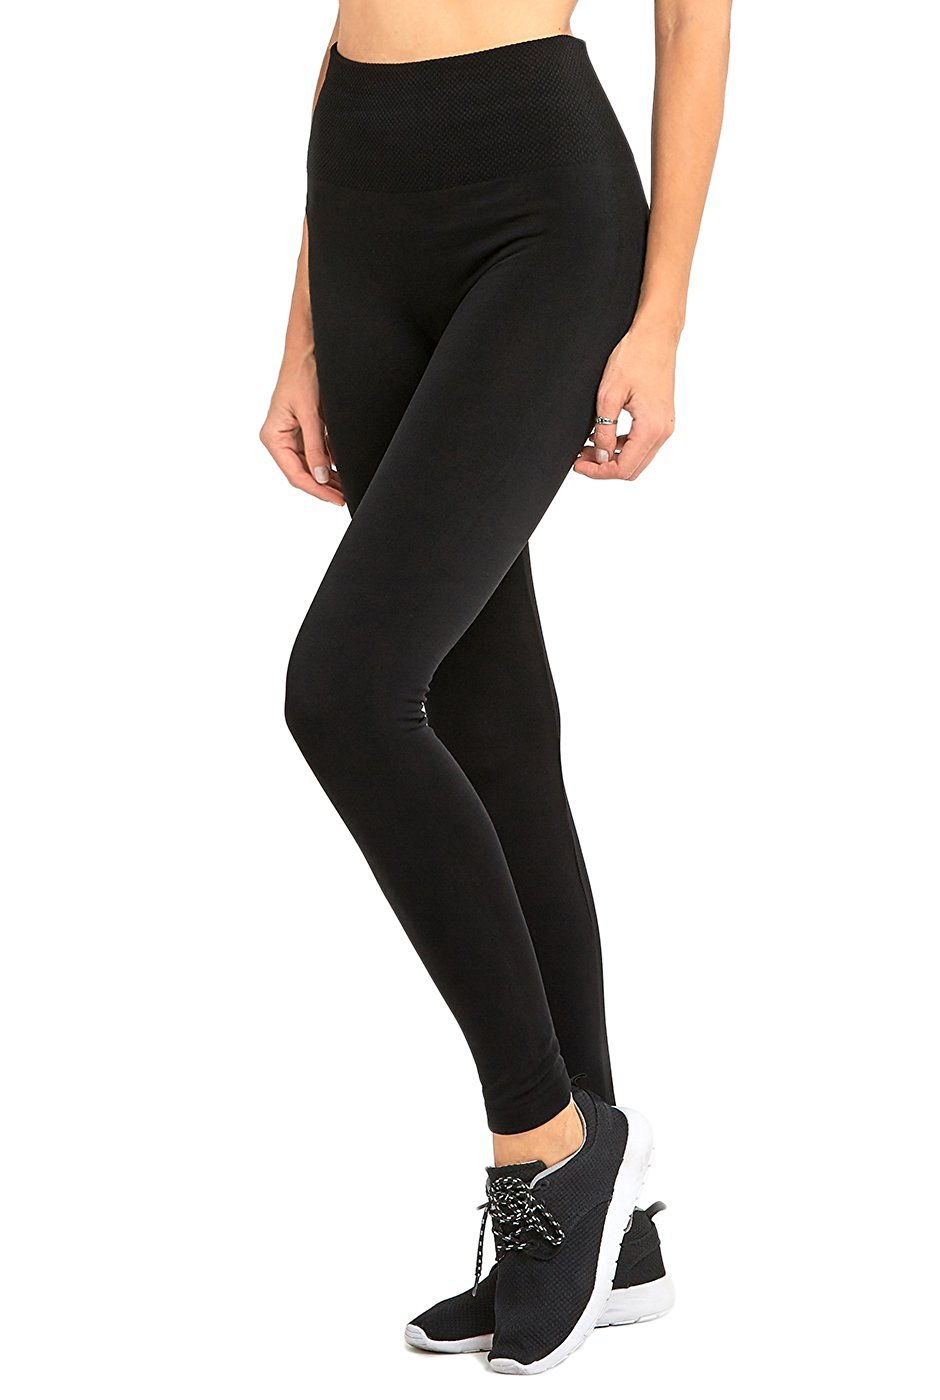 Lined Black Leggings For Women  International Society of Precision  Agriculture